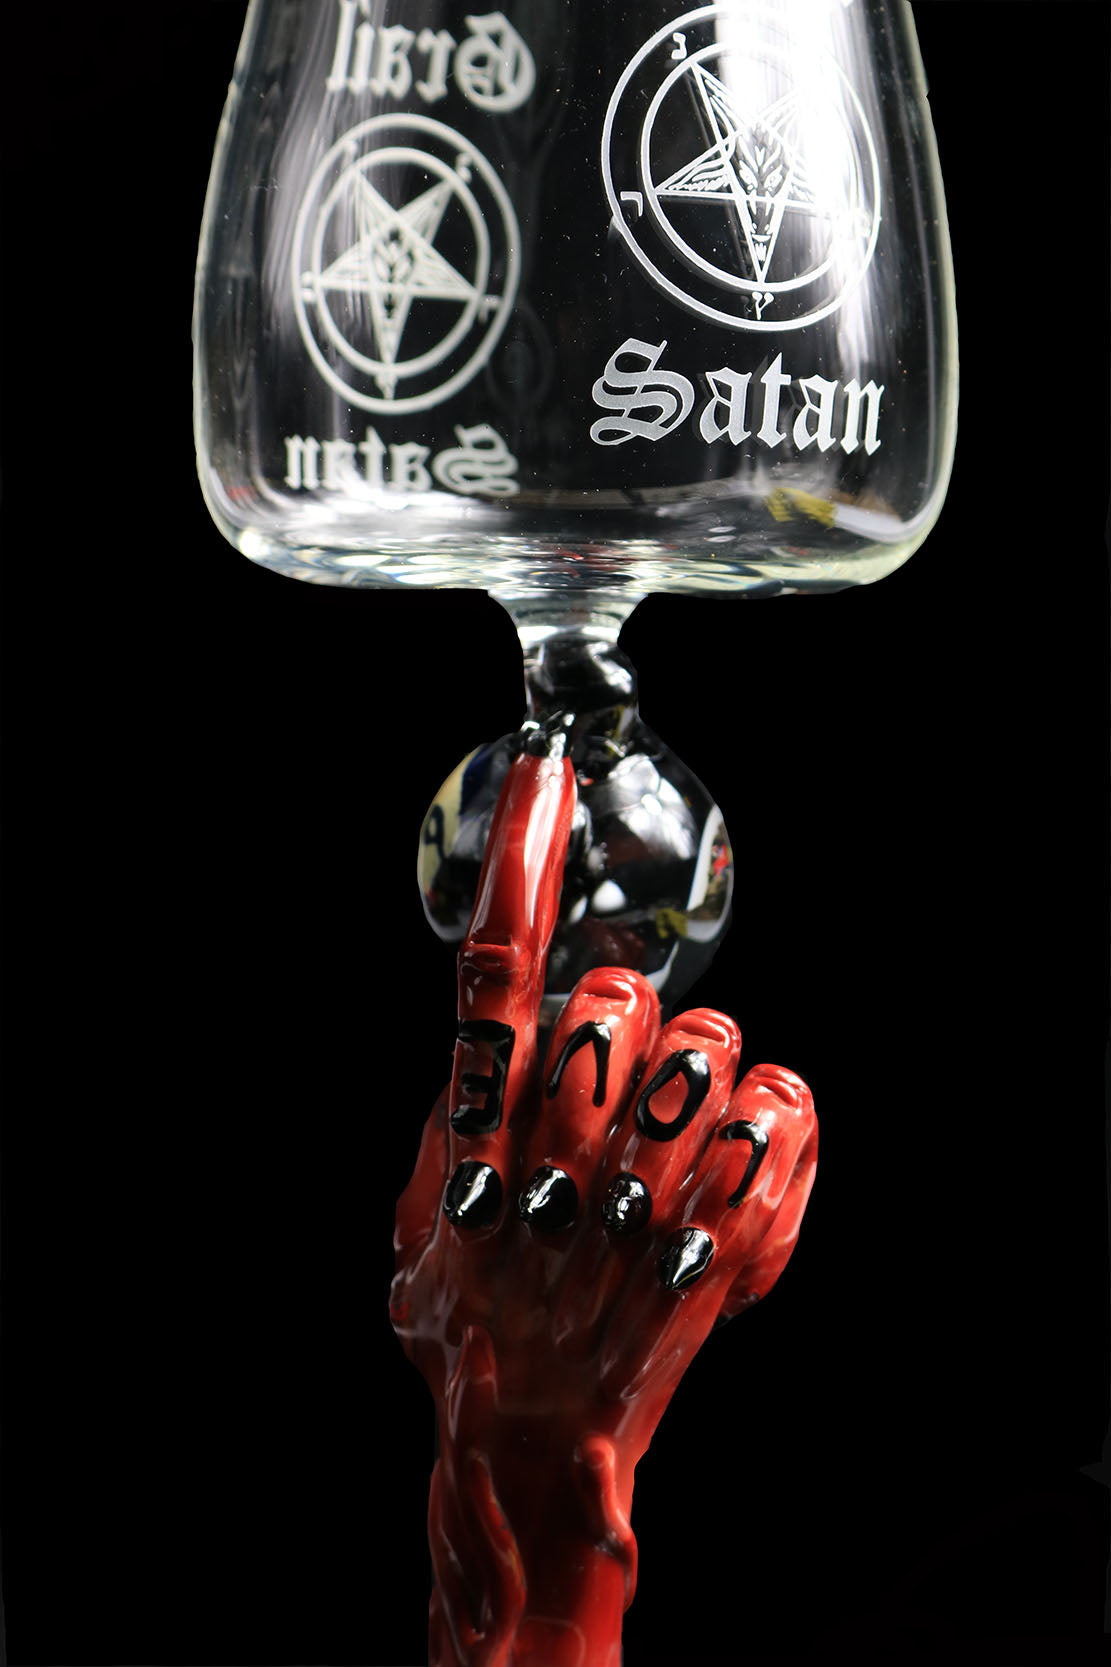 Grail Satan by, Phil_pgw and D-wreck